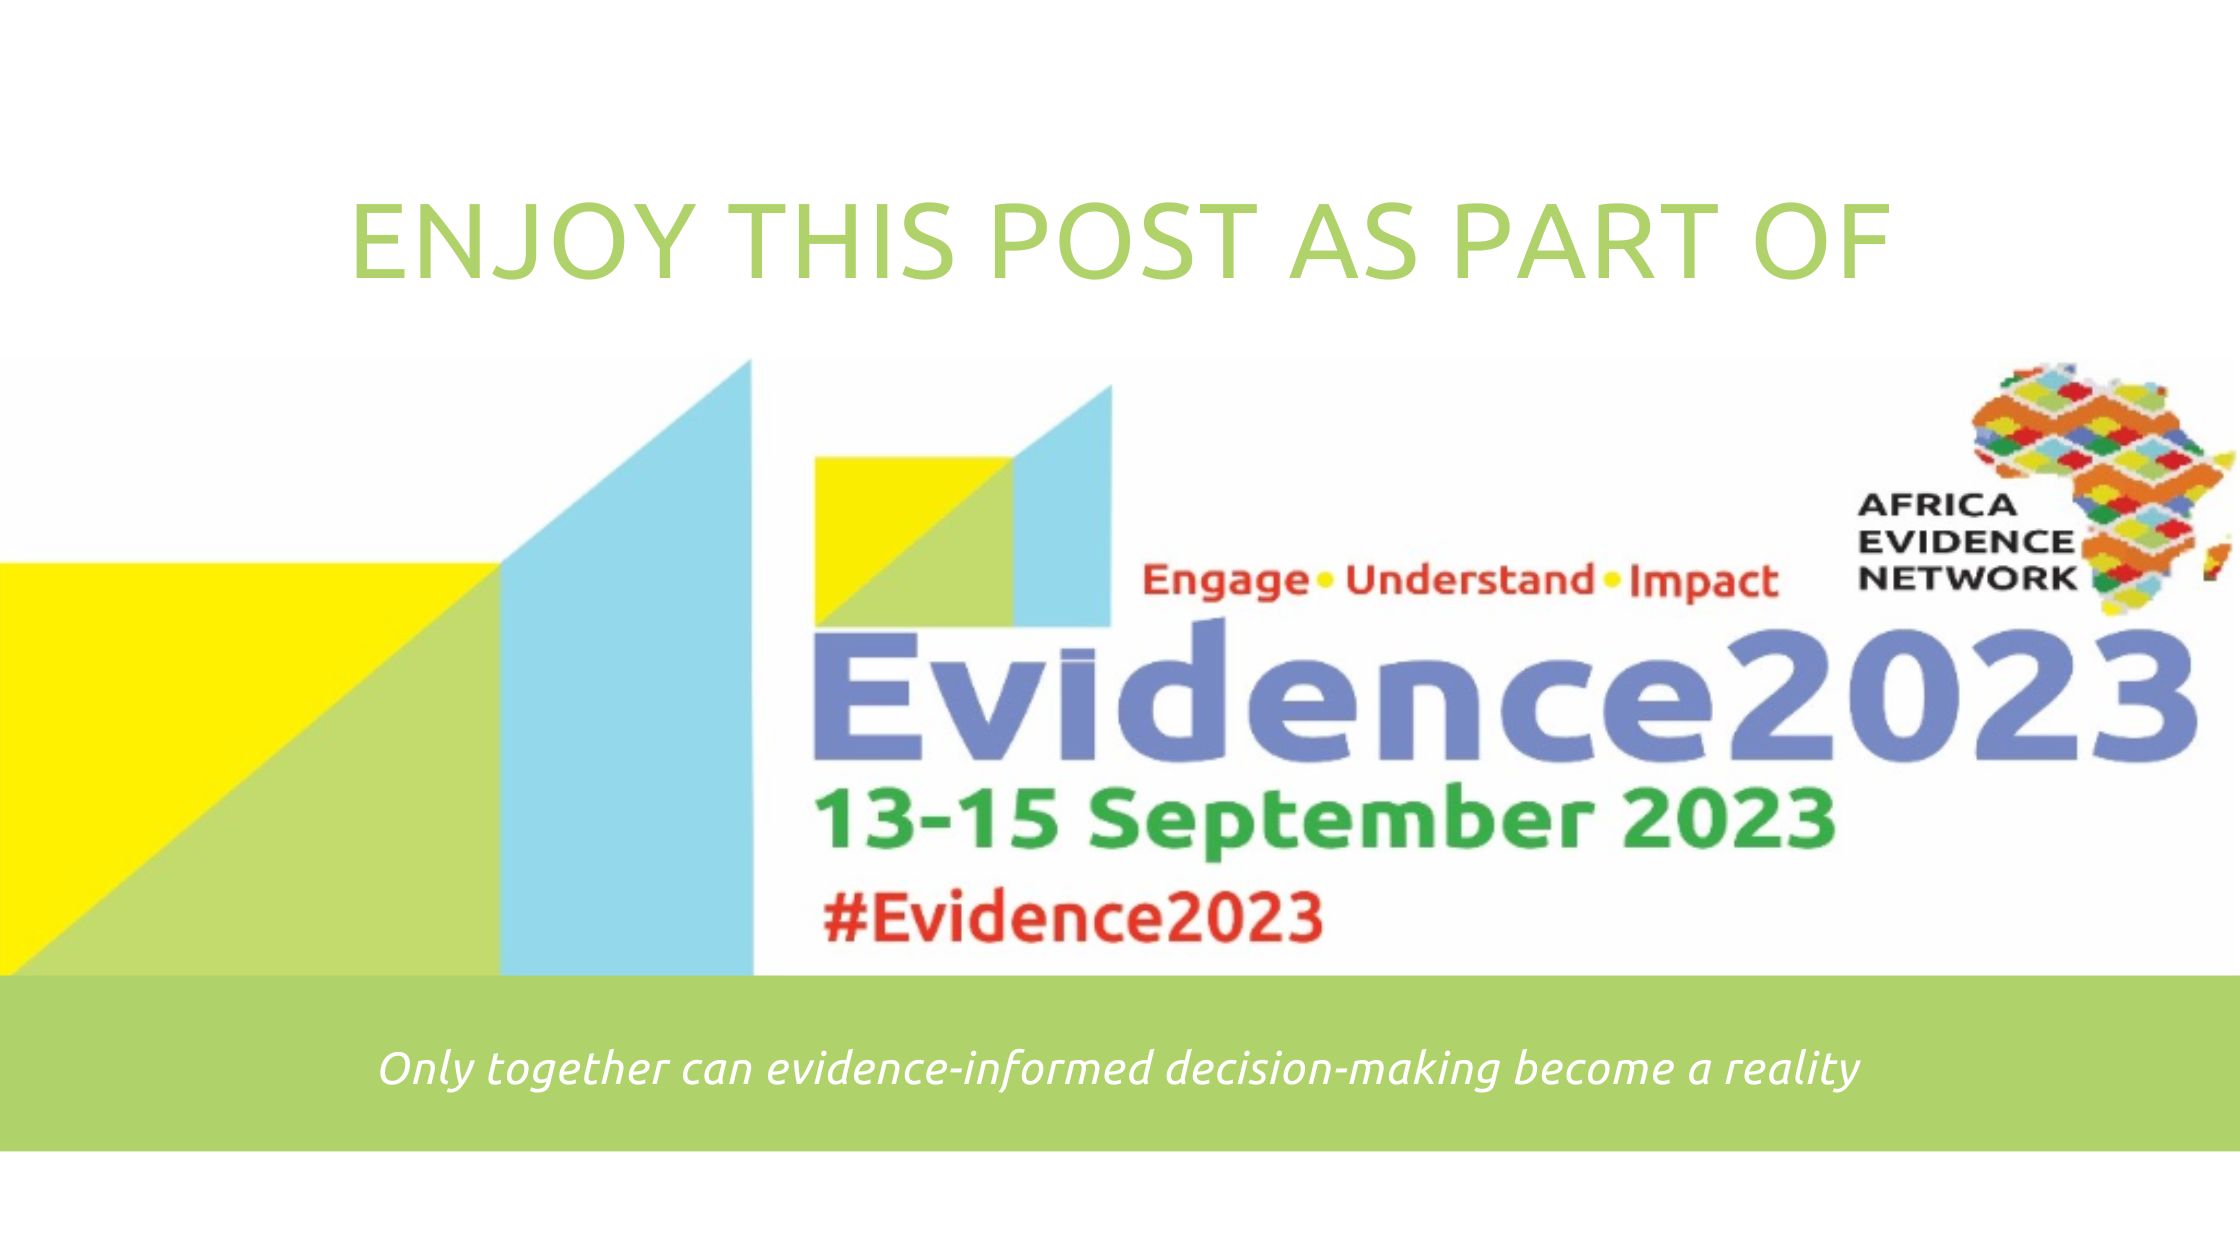 Session 8: Closing the gap between evidence production and uptake: Do we need to re-think where we locate communication in the pecking order?